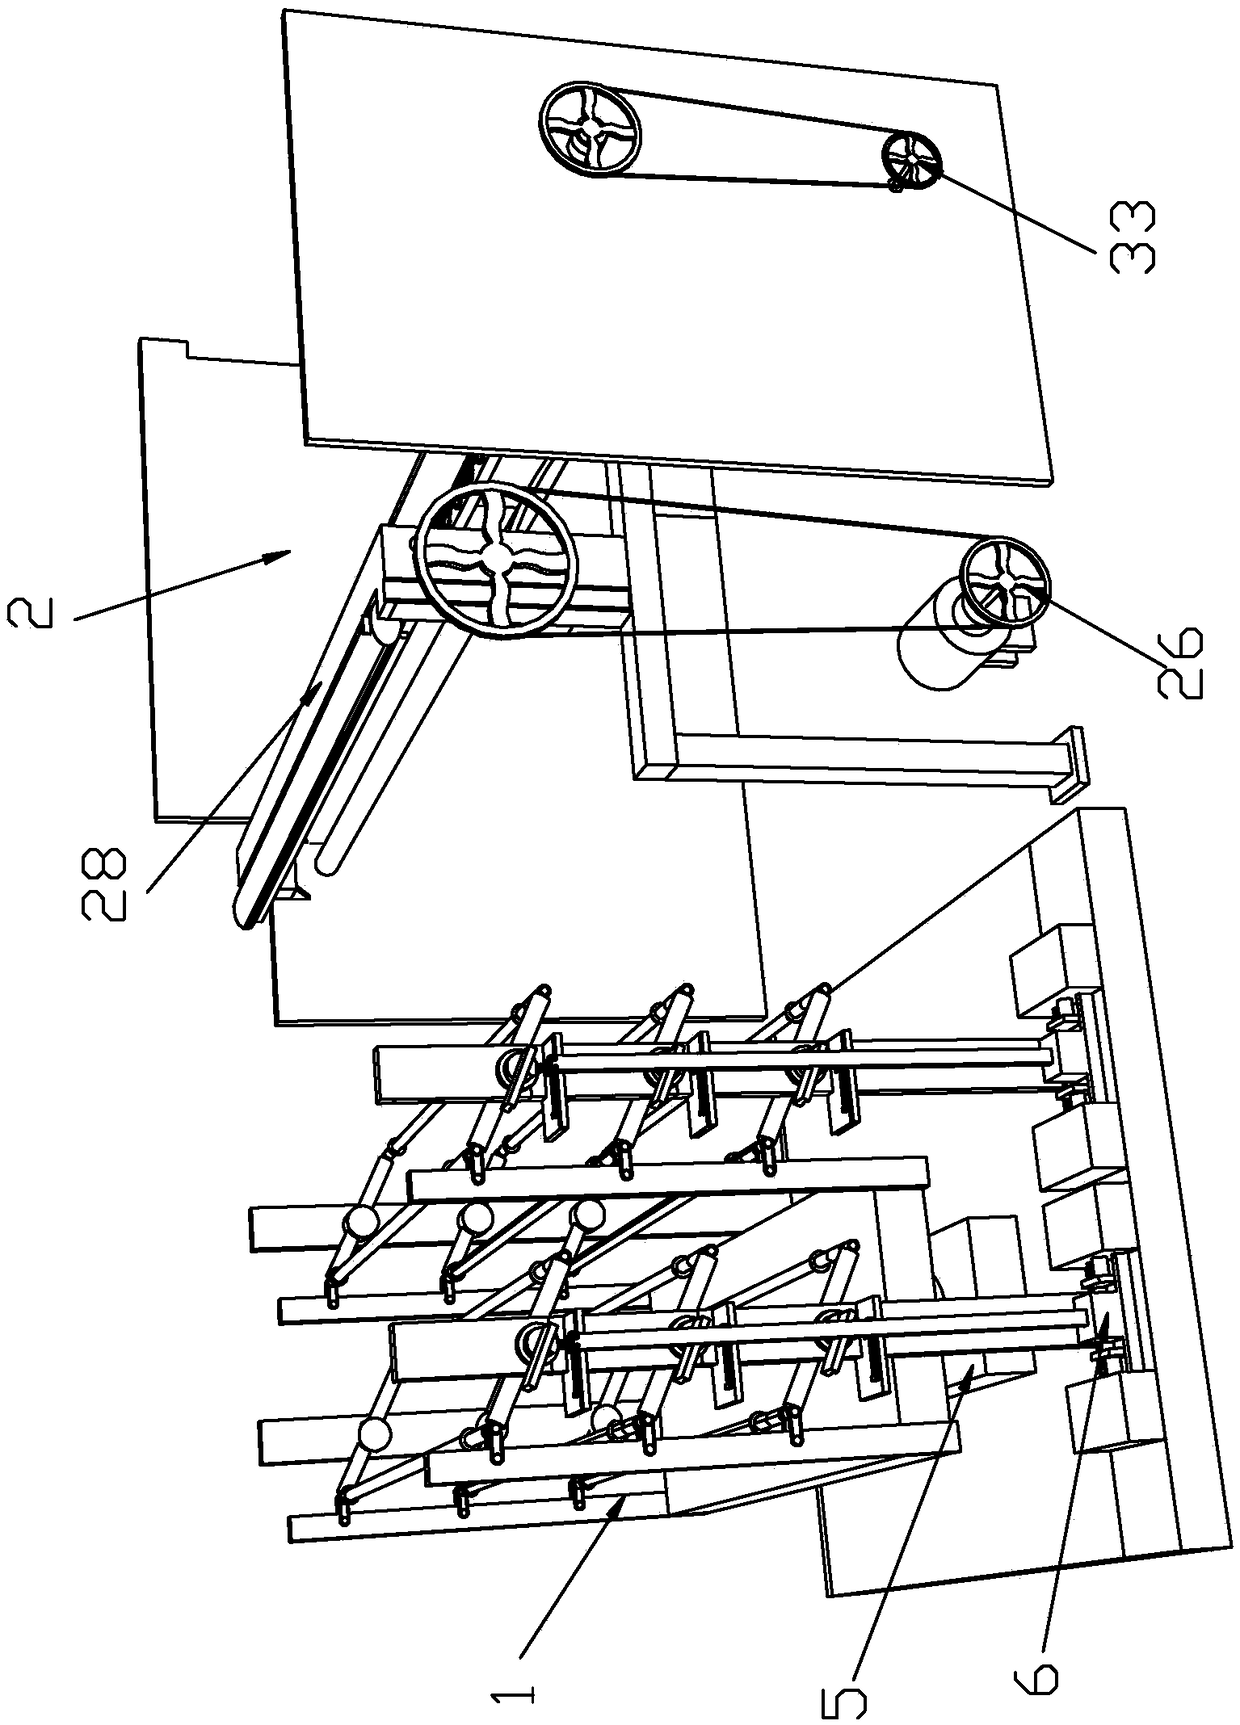 Cloth leveling device for textile spinning